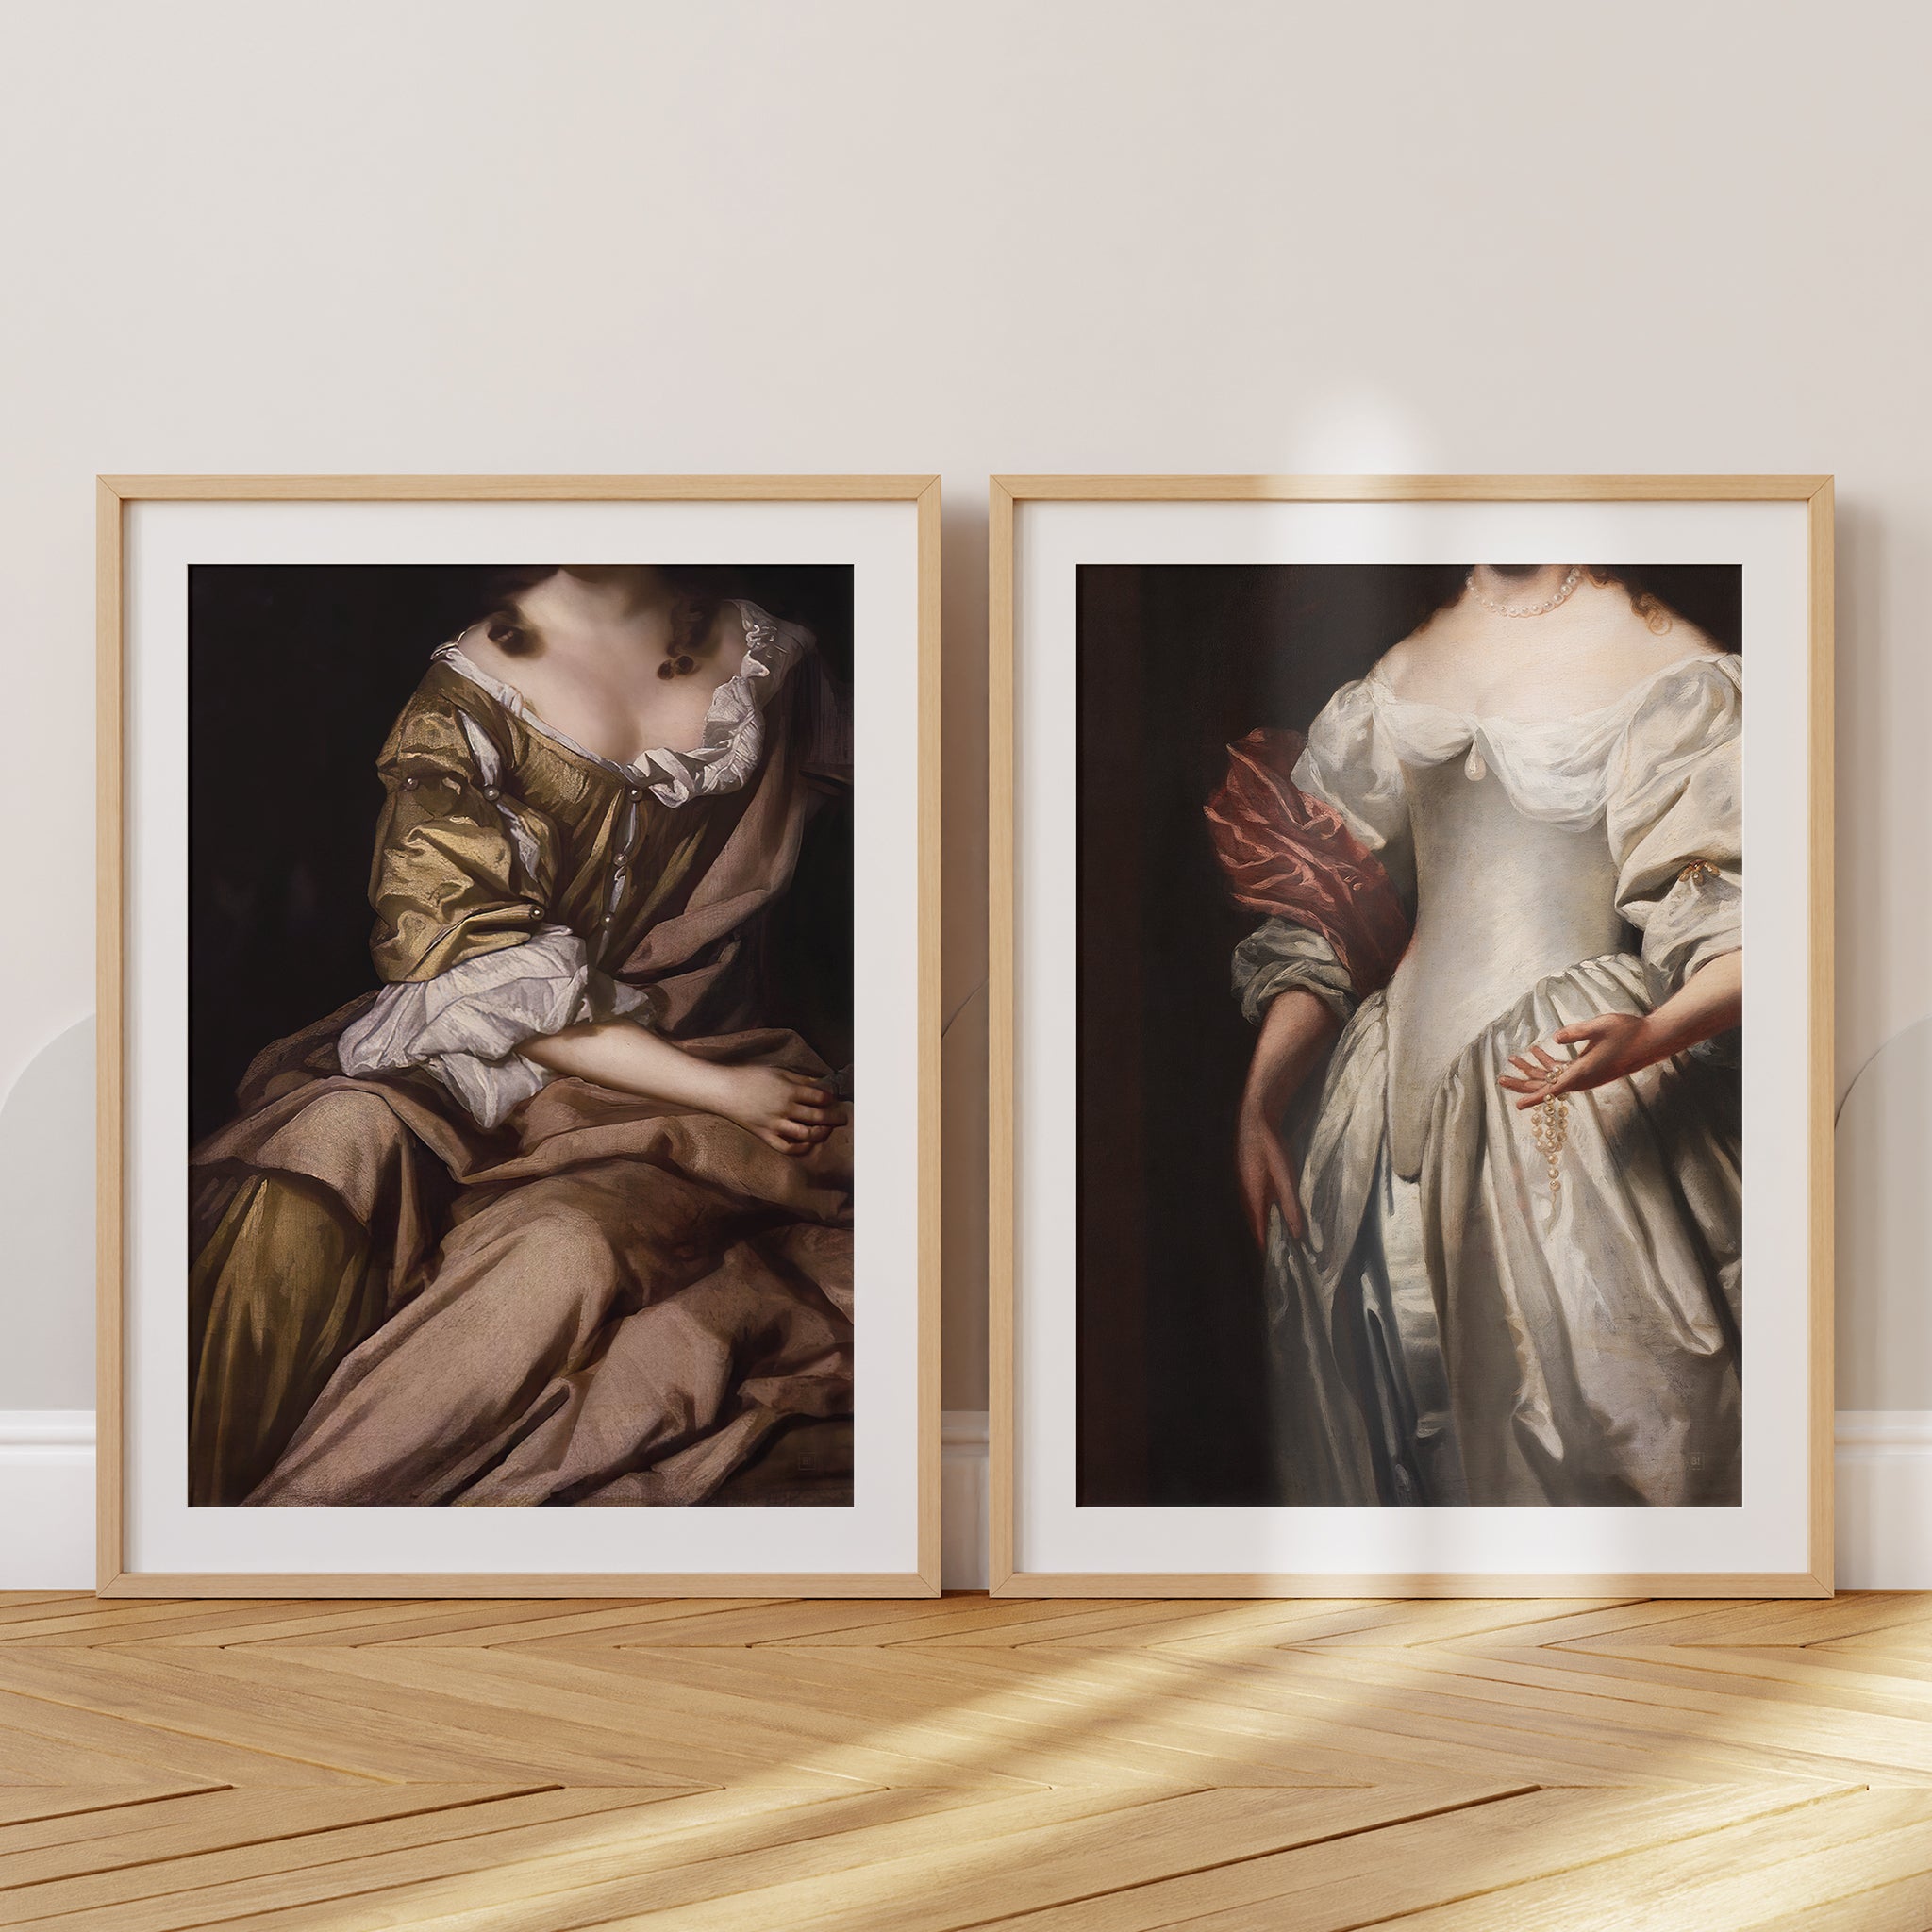 Be inspired by our altered Victorian Woman in White Satin Dress art print. This artwork was printed using the giclée process on archival acid-free paper and is presented in a set of two oak frames with passe-partout that captures its timeless beauty in every detail.